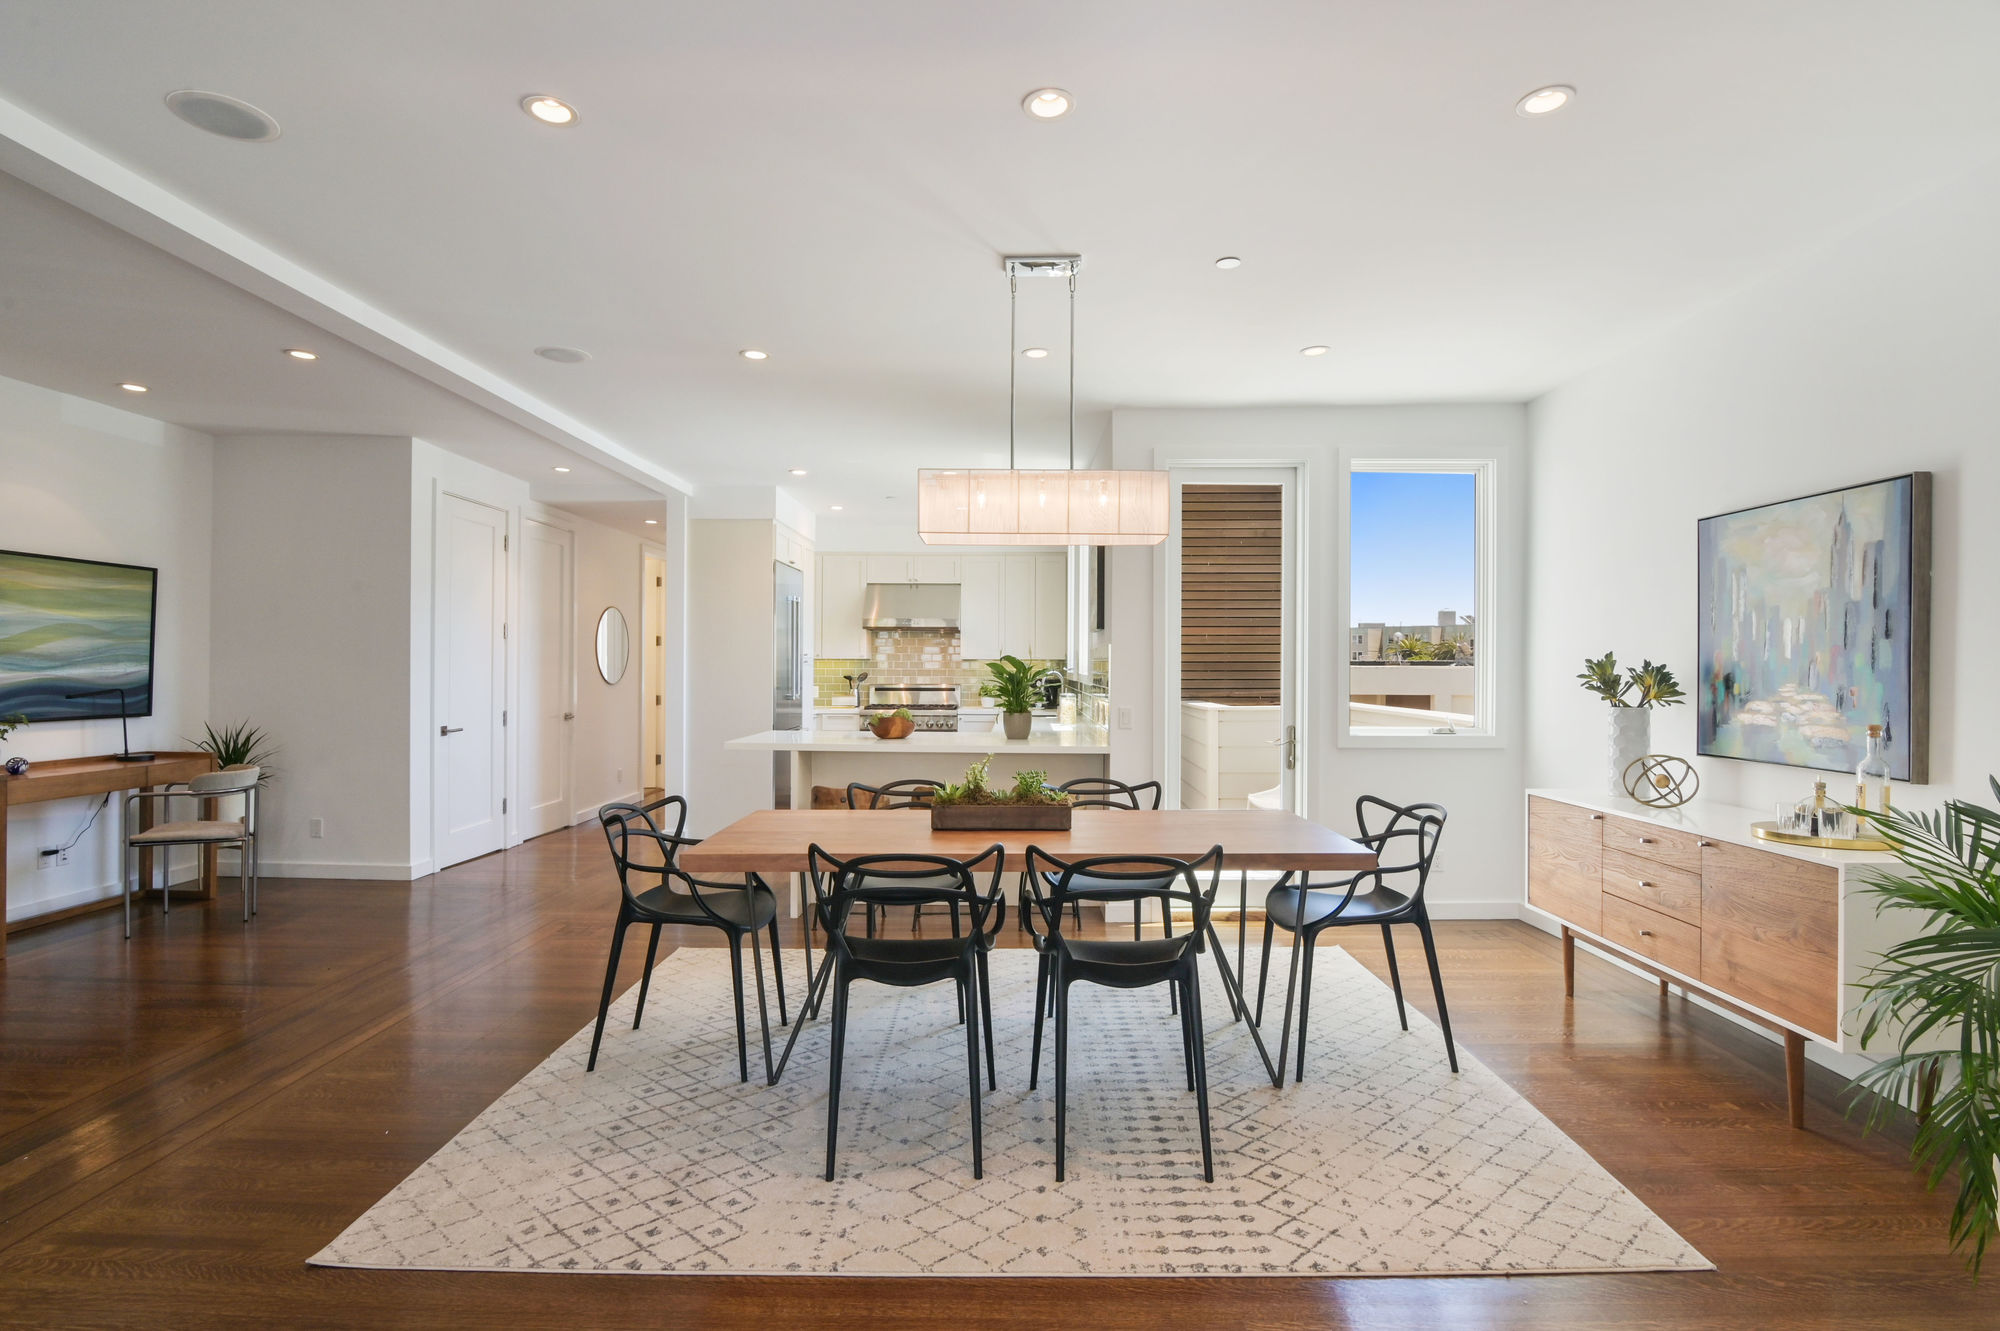 Property Photo: View of a dining area, featuring wood floors, modern fixtures, and plenty of natural light